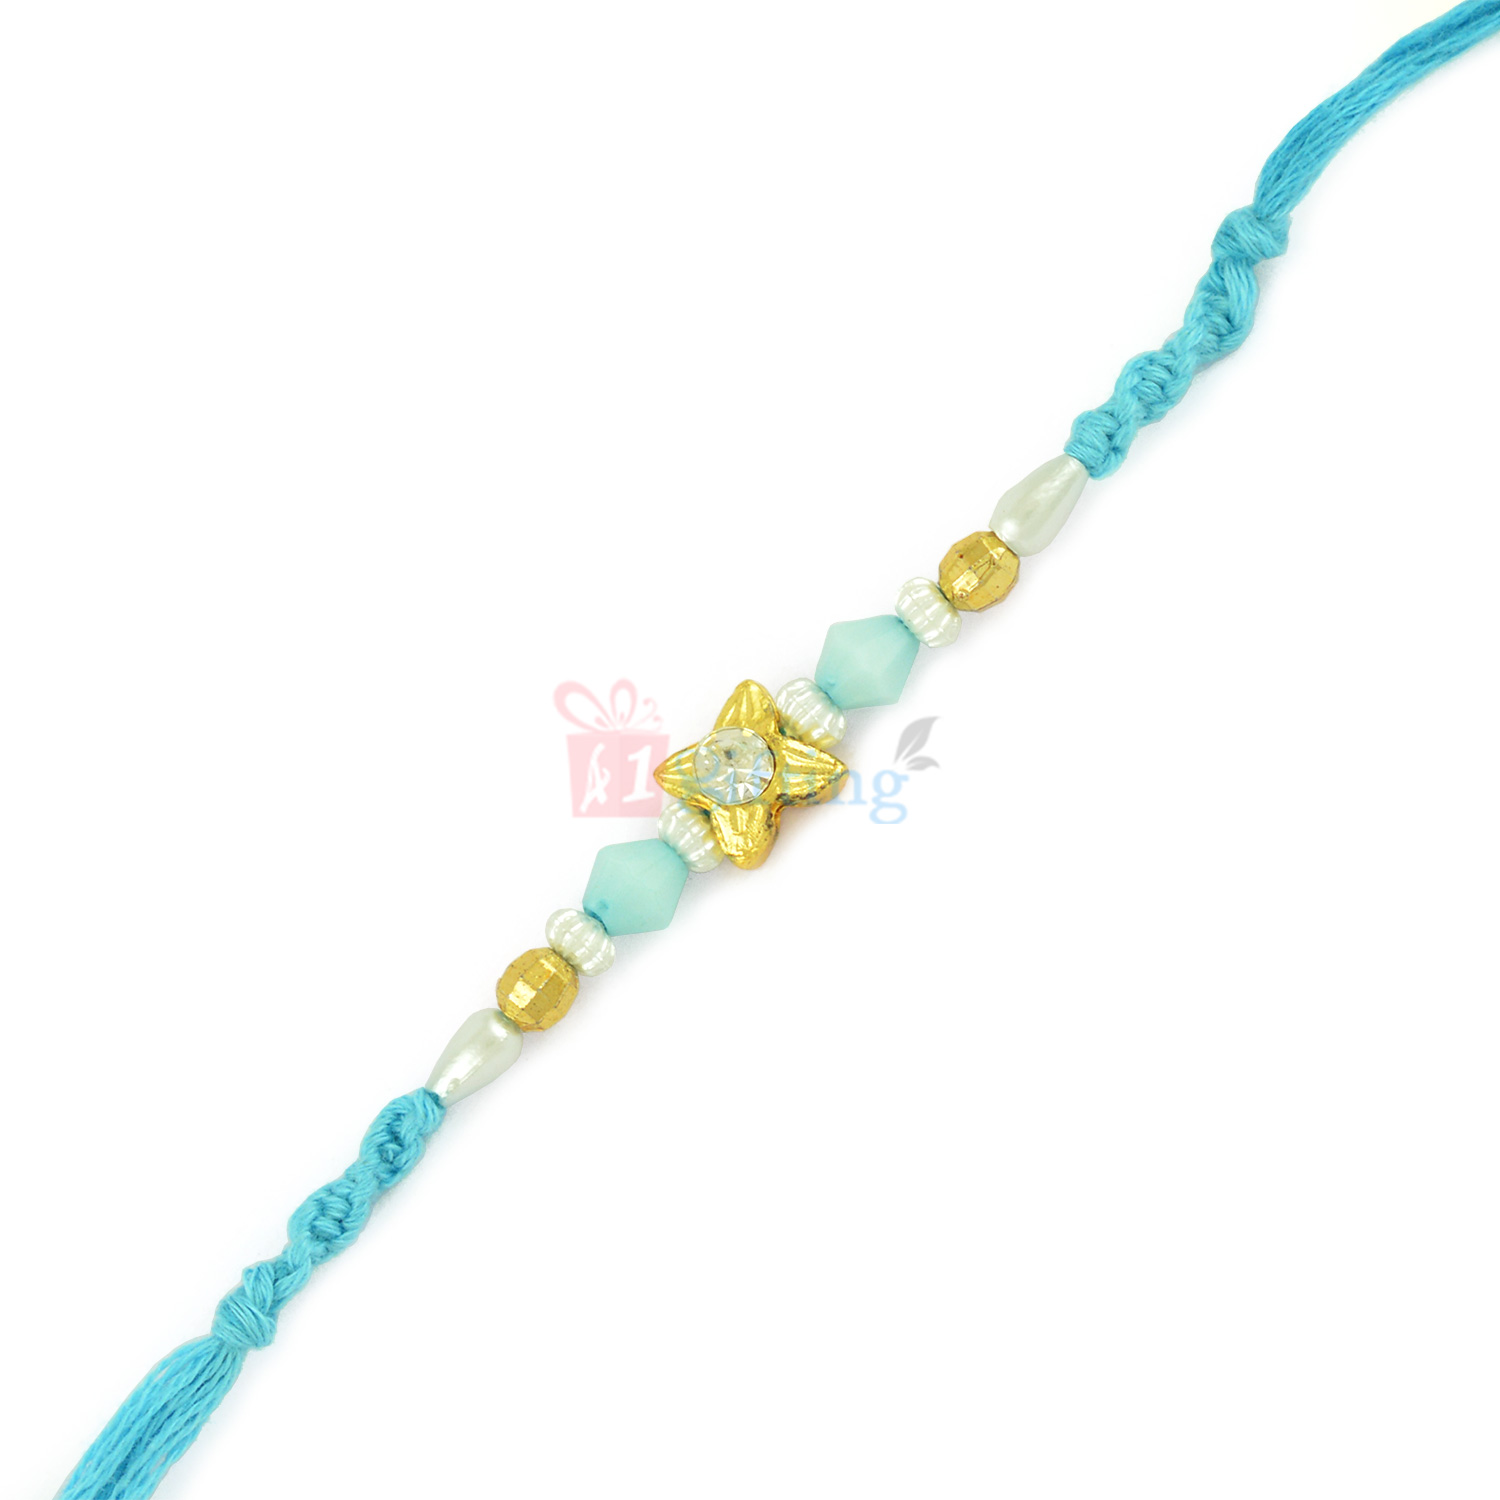 Awesome Golden Beads and Floral Thread Rakhi